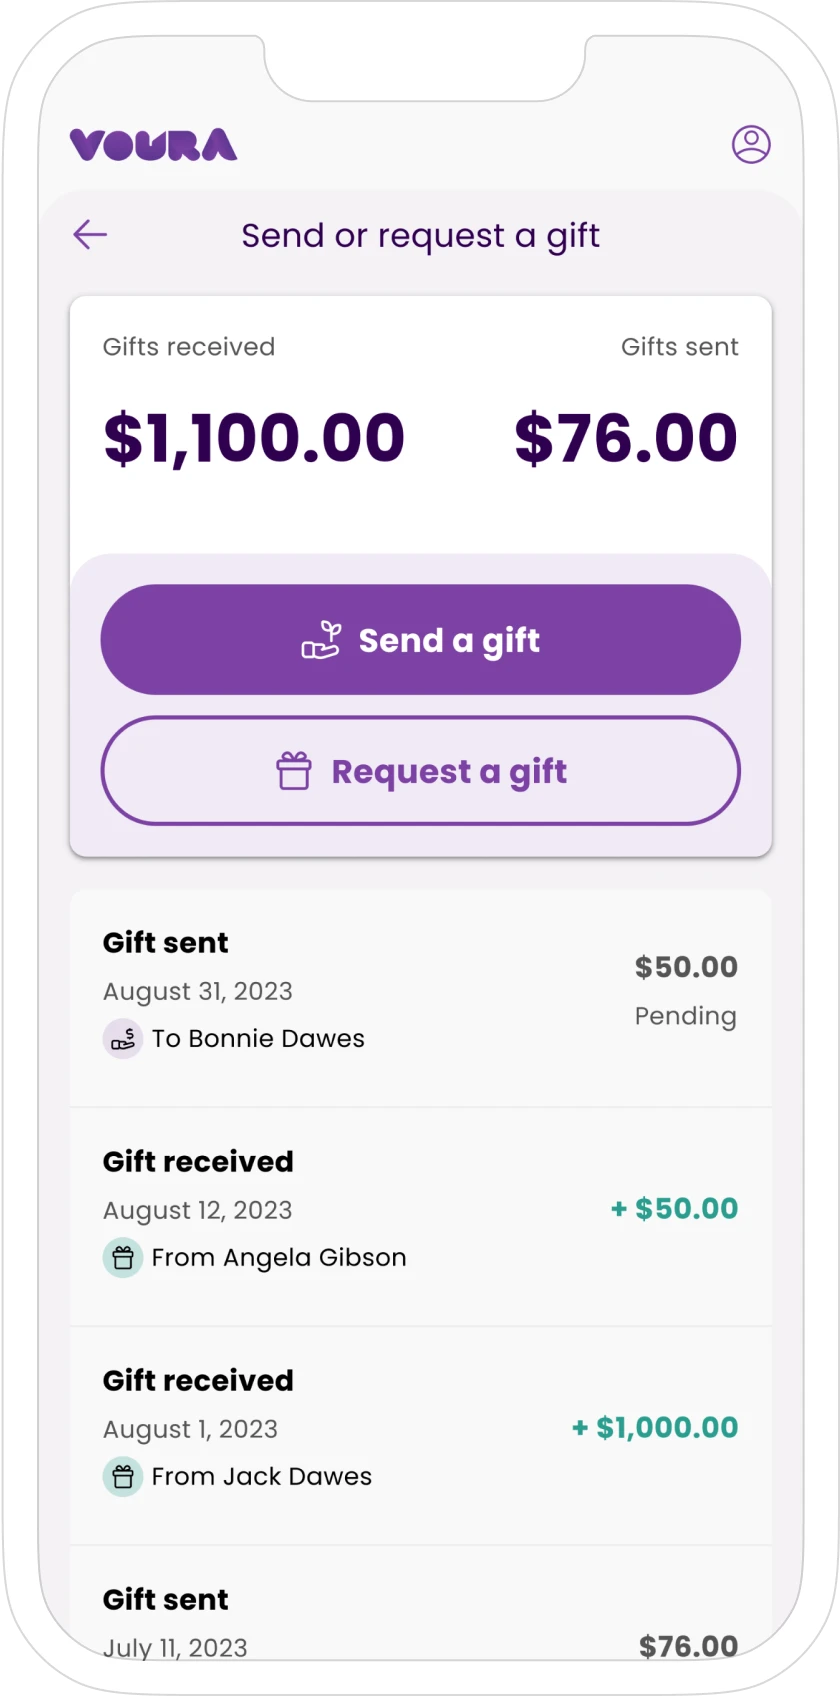 Mobile phone with Voura gift screen, showing options to Send or Request a gift, balance of $76 in gifts received, $100 in gifts sent, and a list of transactions showing the gifts sent and received.